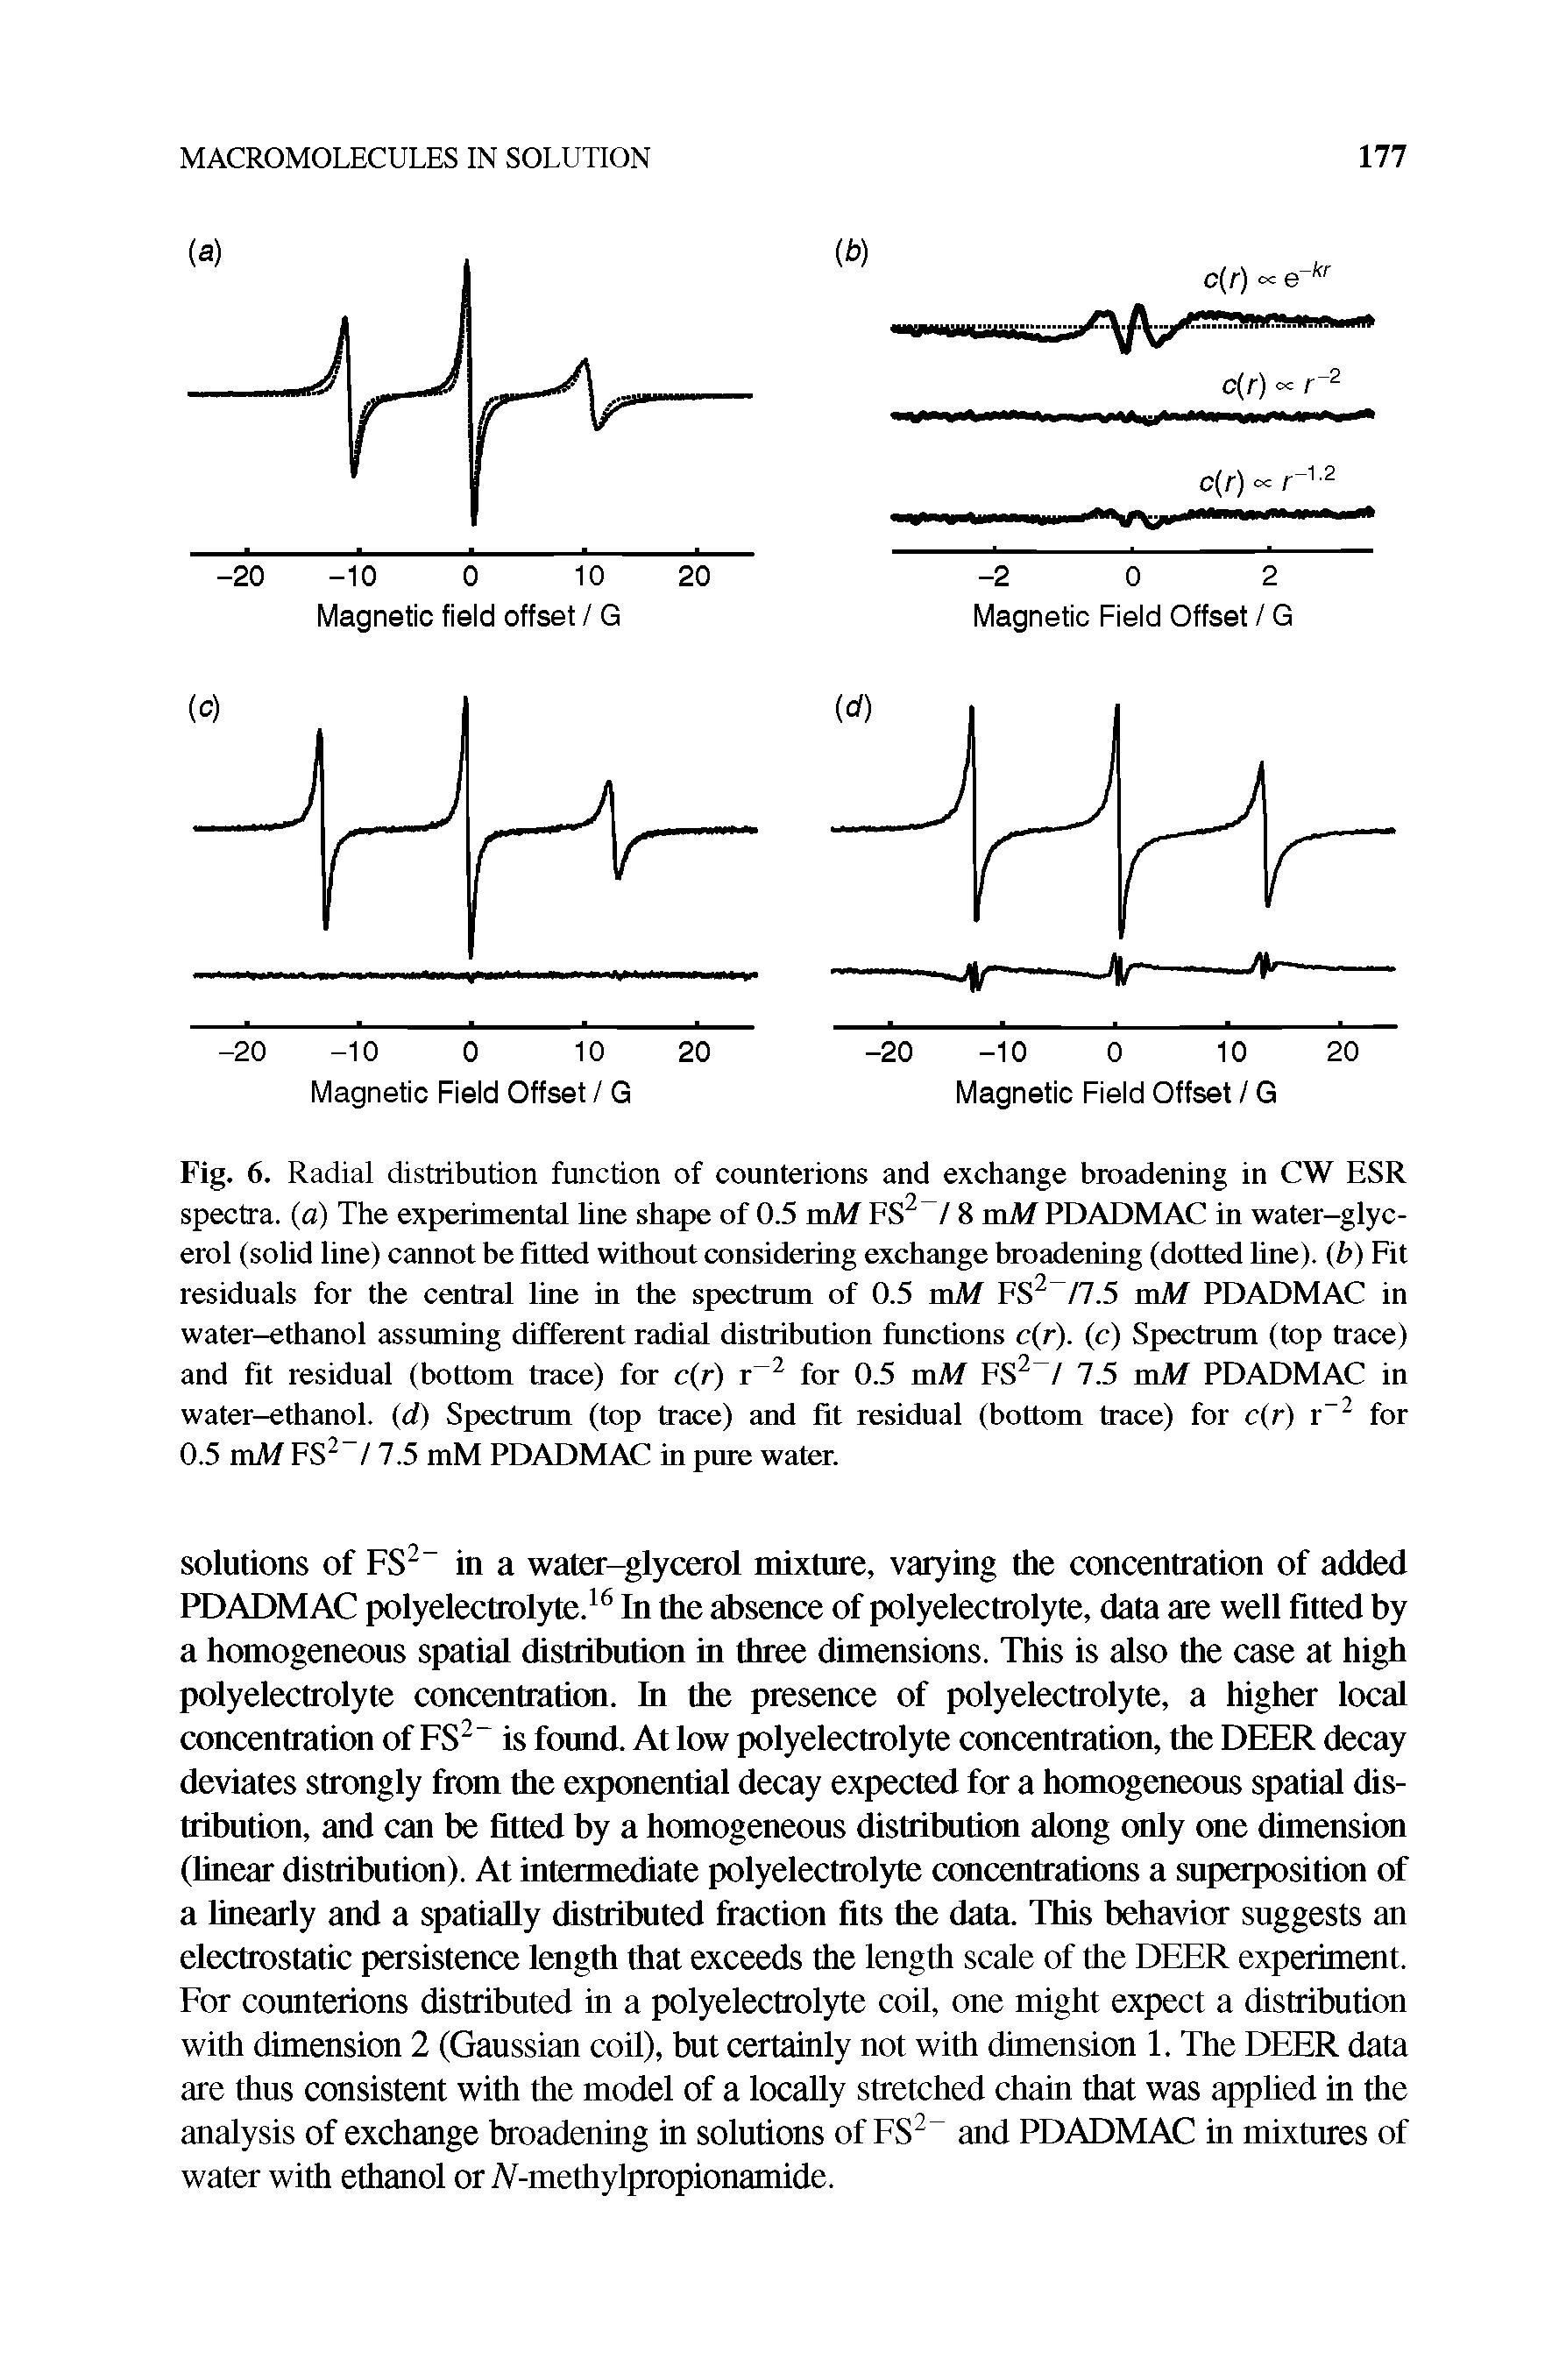 Fig. 6. Radial distribution function of counterions and exchange broadening in CW ESR spectra, (a) The experimental line shape of 0.5 mM FS / 8 mM PDADMAC in water-giyc-erol (solid line) cannot be fitted without considering exchange broadening (dotted line), (b) Fit residuals for the central line in the spectrum of 0.5 mM FS /7.5 mM PDADMAC in water-ethanol assuming different radial distribution functions c(r). (c) Spectrum (top trace) and fit residual (bottom trace) for c(r) r for 0.5 mM FS / 7.5 mM PDADMAC in...